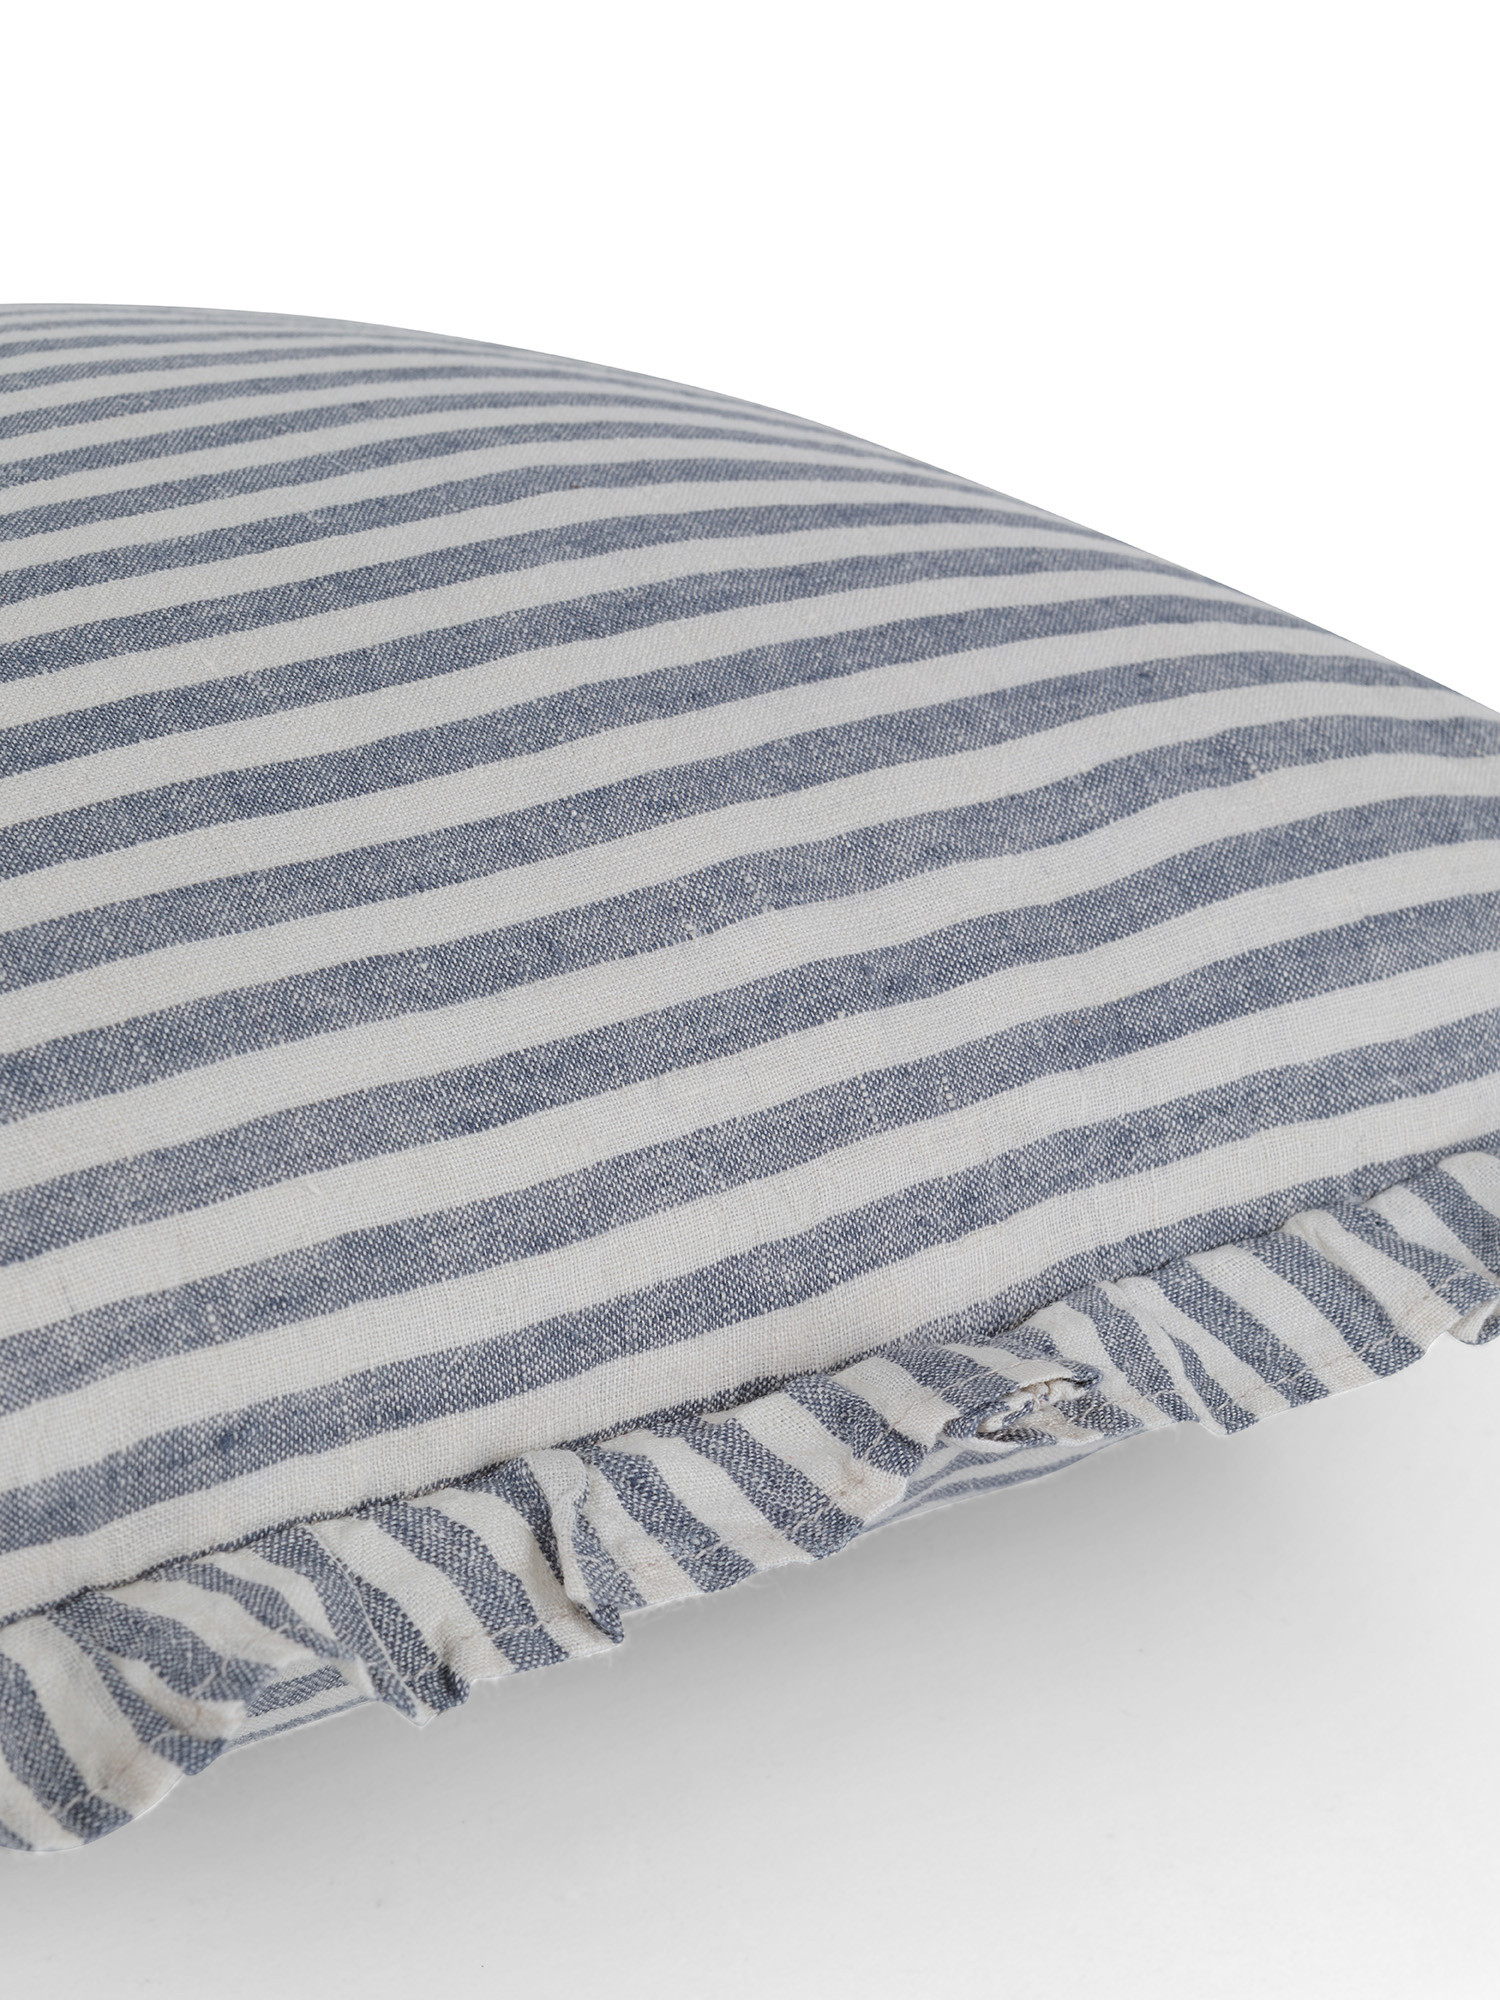 Striped cushion in pure linen 40x40 cm, Blue, large image number 2